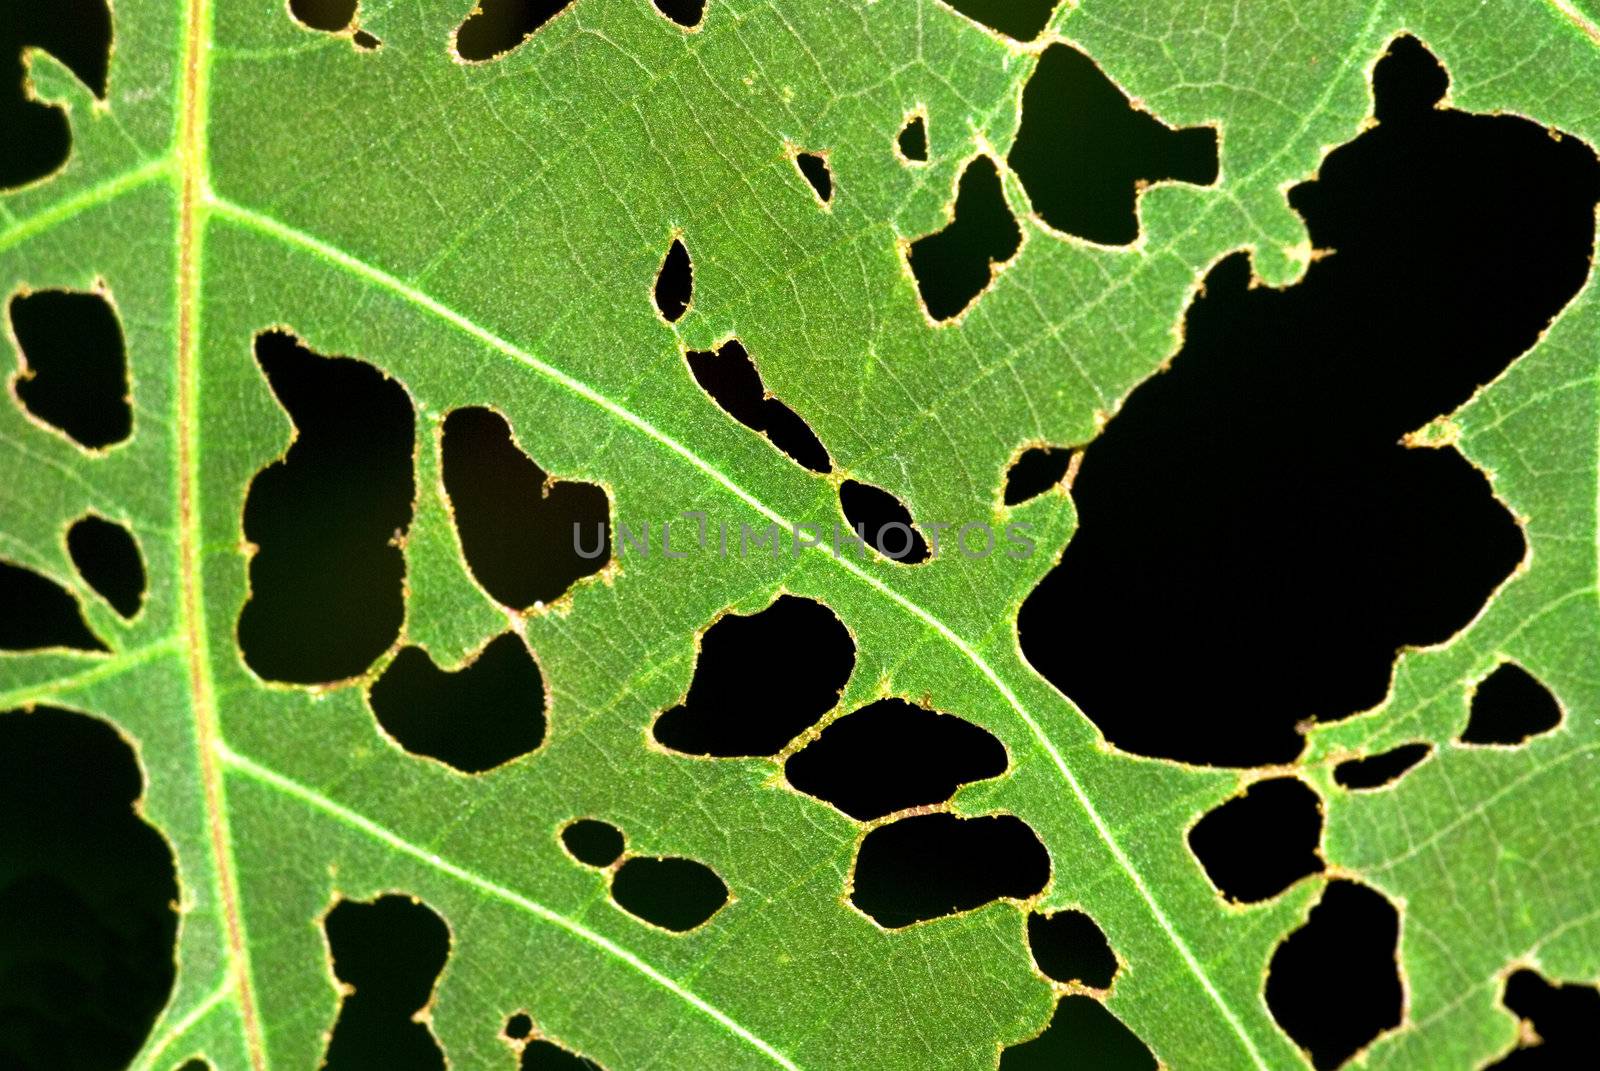 Leaf with holes, eaten by pests.